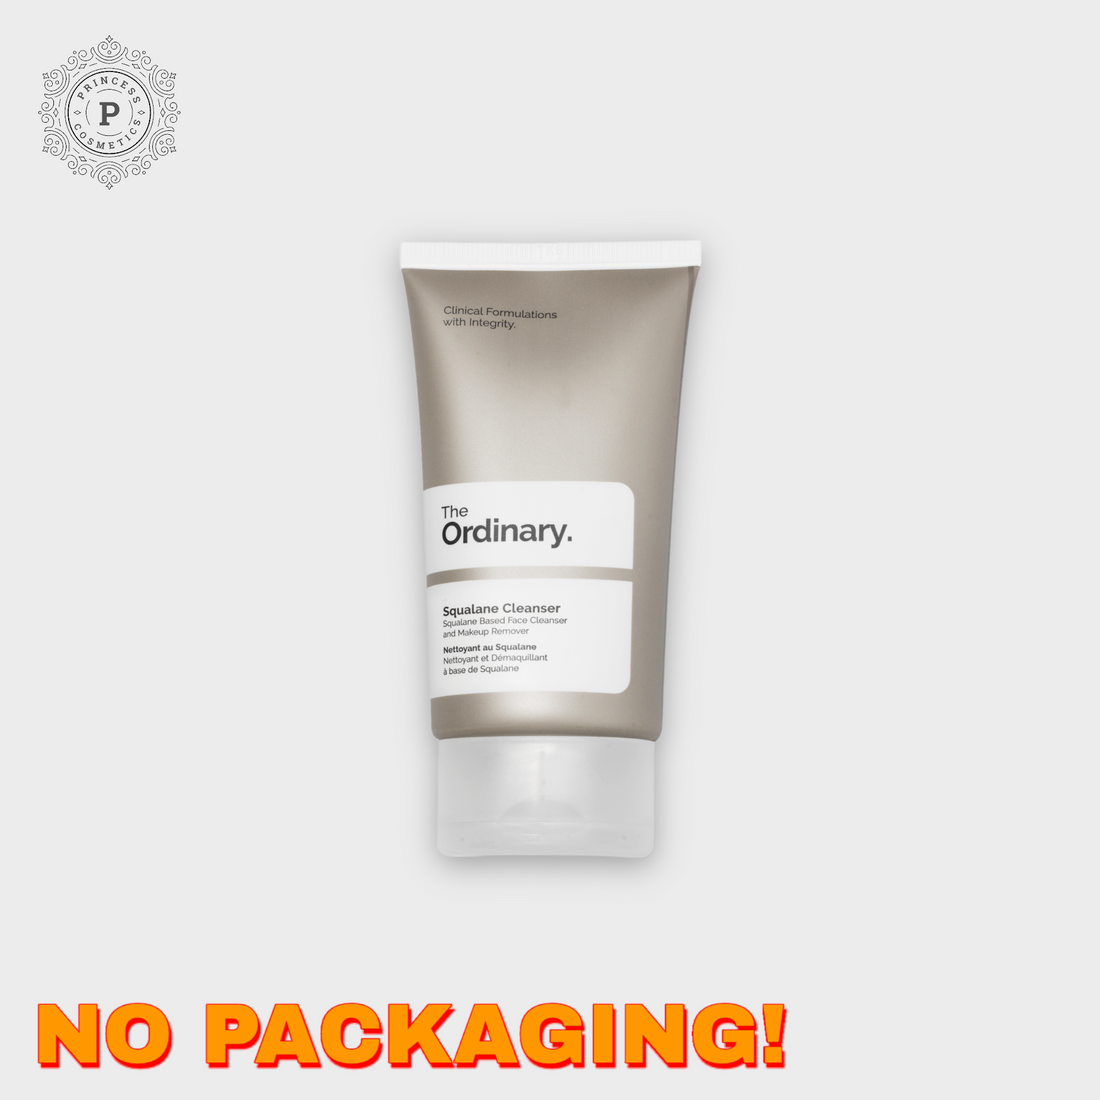 The Ordinary - No Packaging (SALE)